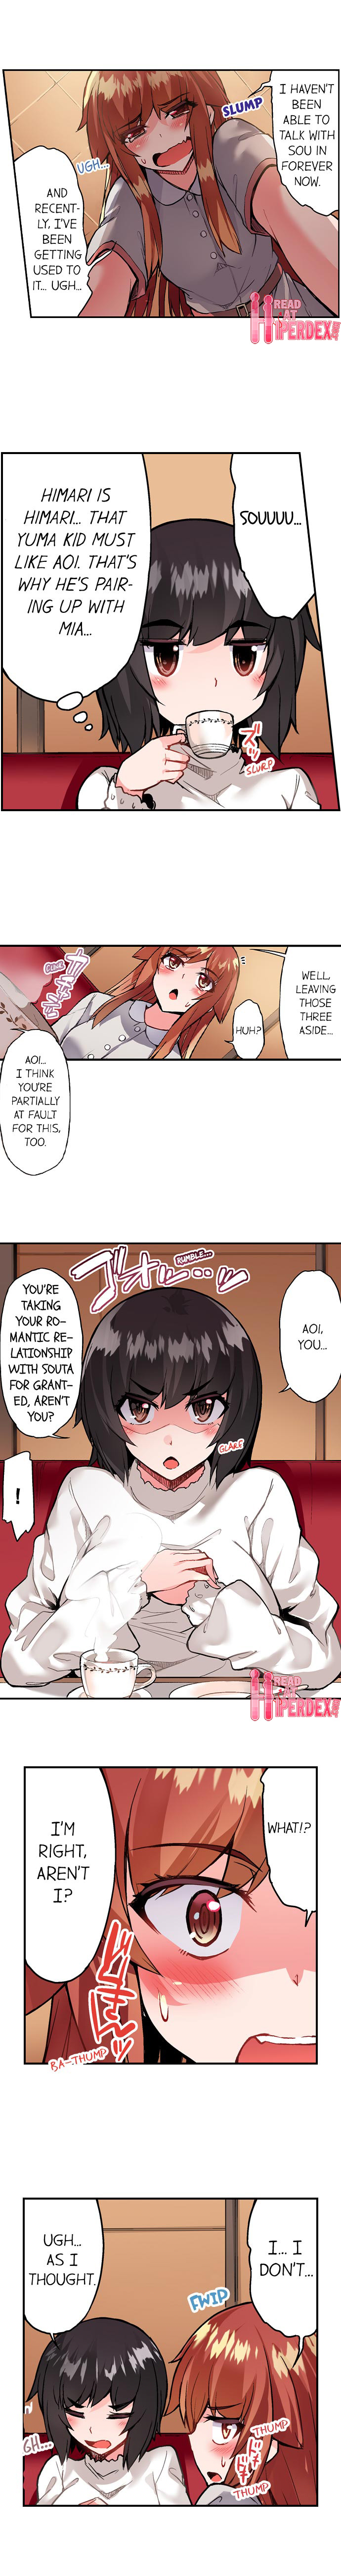 Traditional Job of Washing Girls’ Body - Chapter 102 Page 3